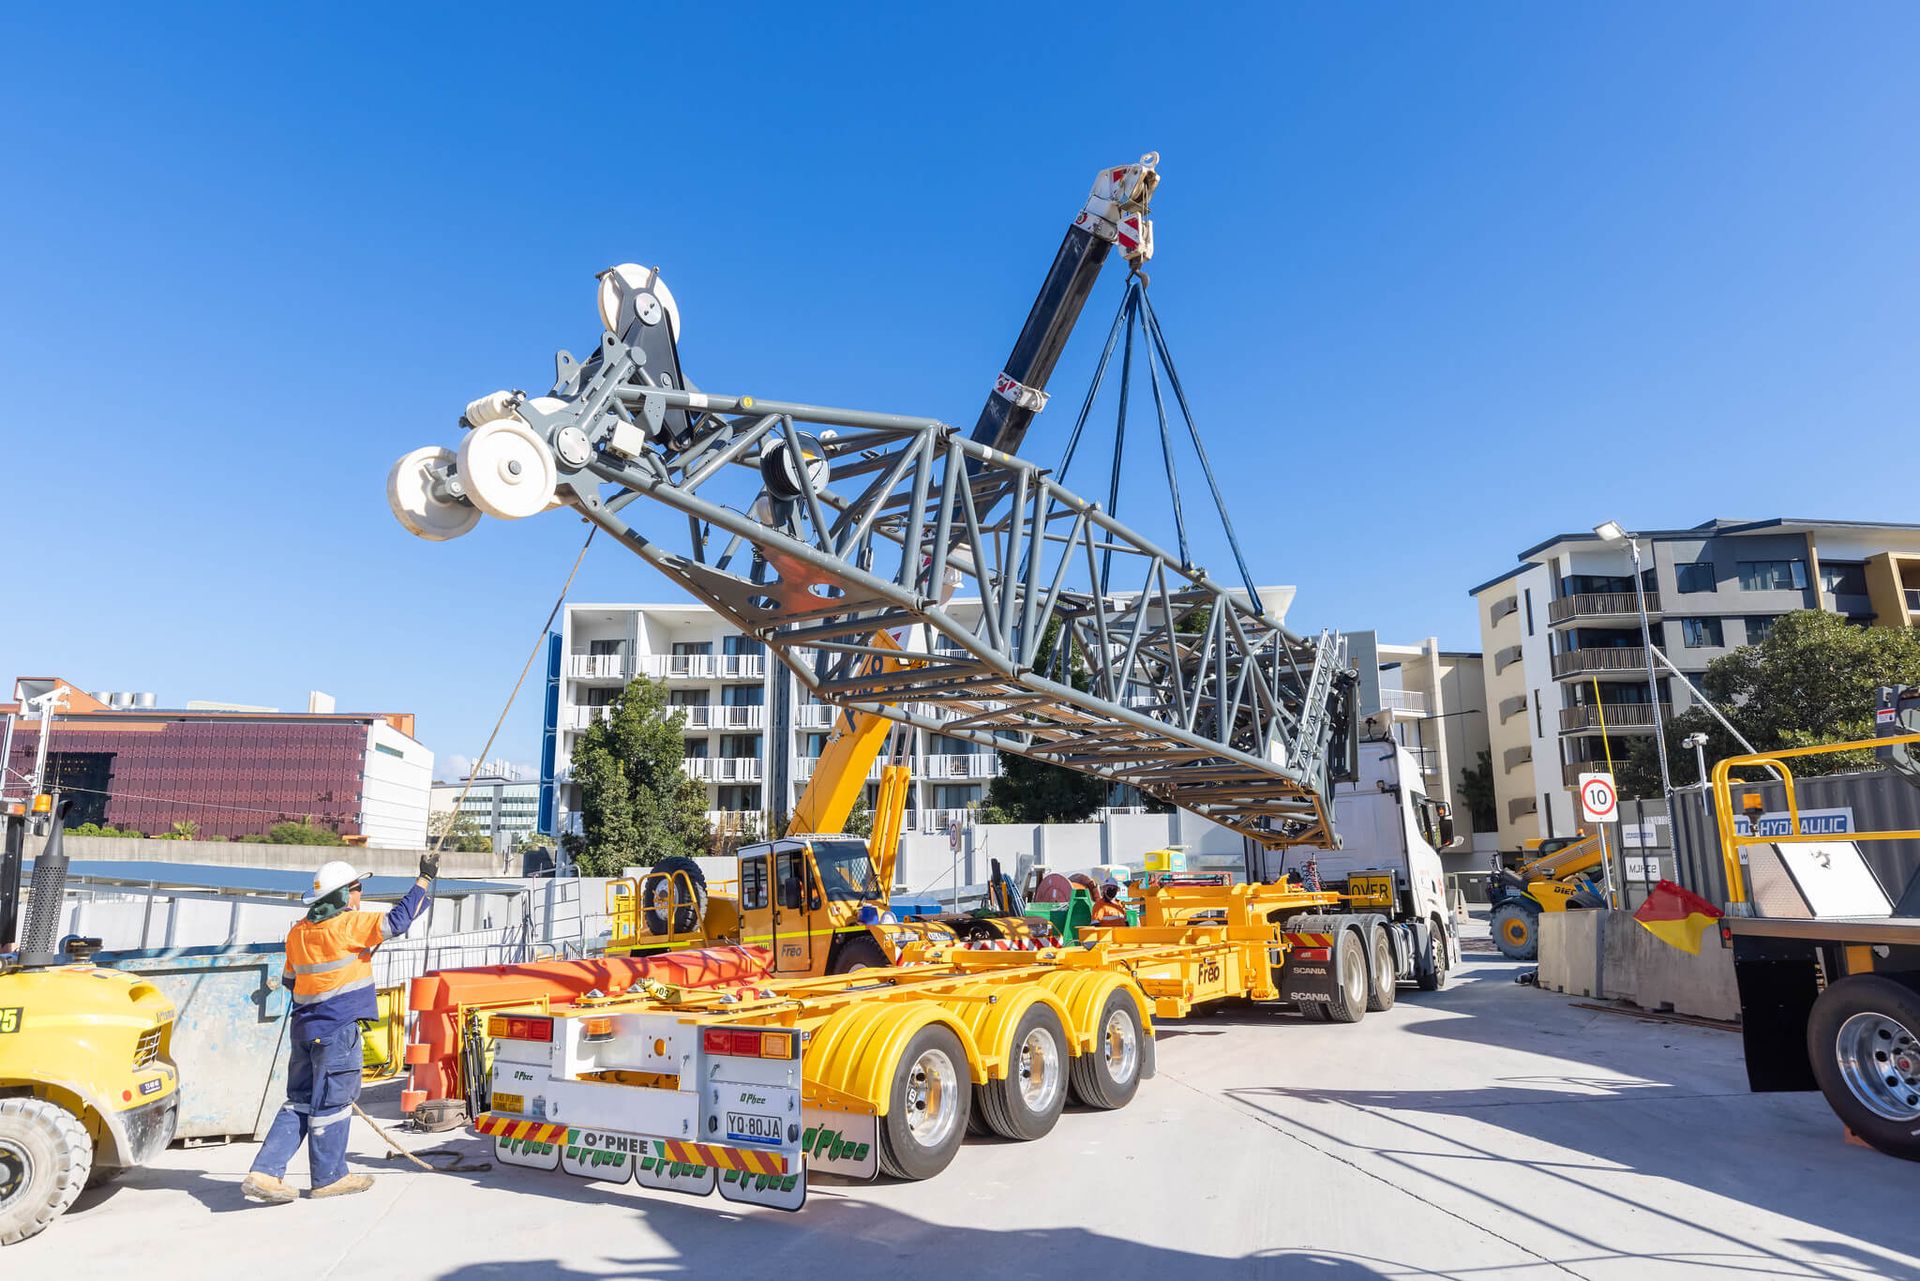 Freo's Ophee Trailer Crane Counterweight SKEL onsite showing the lift innovations